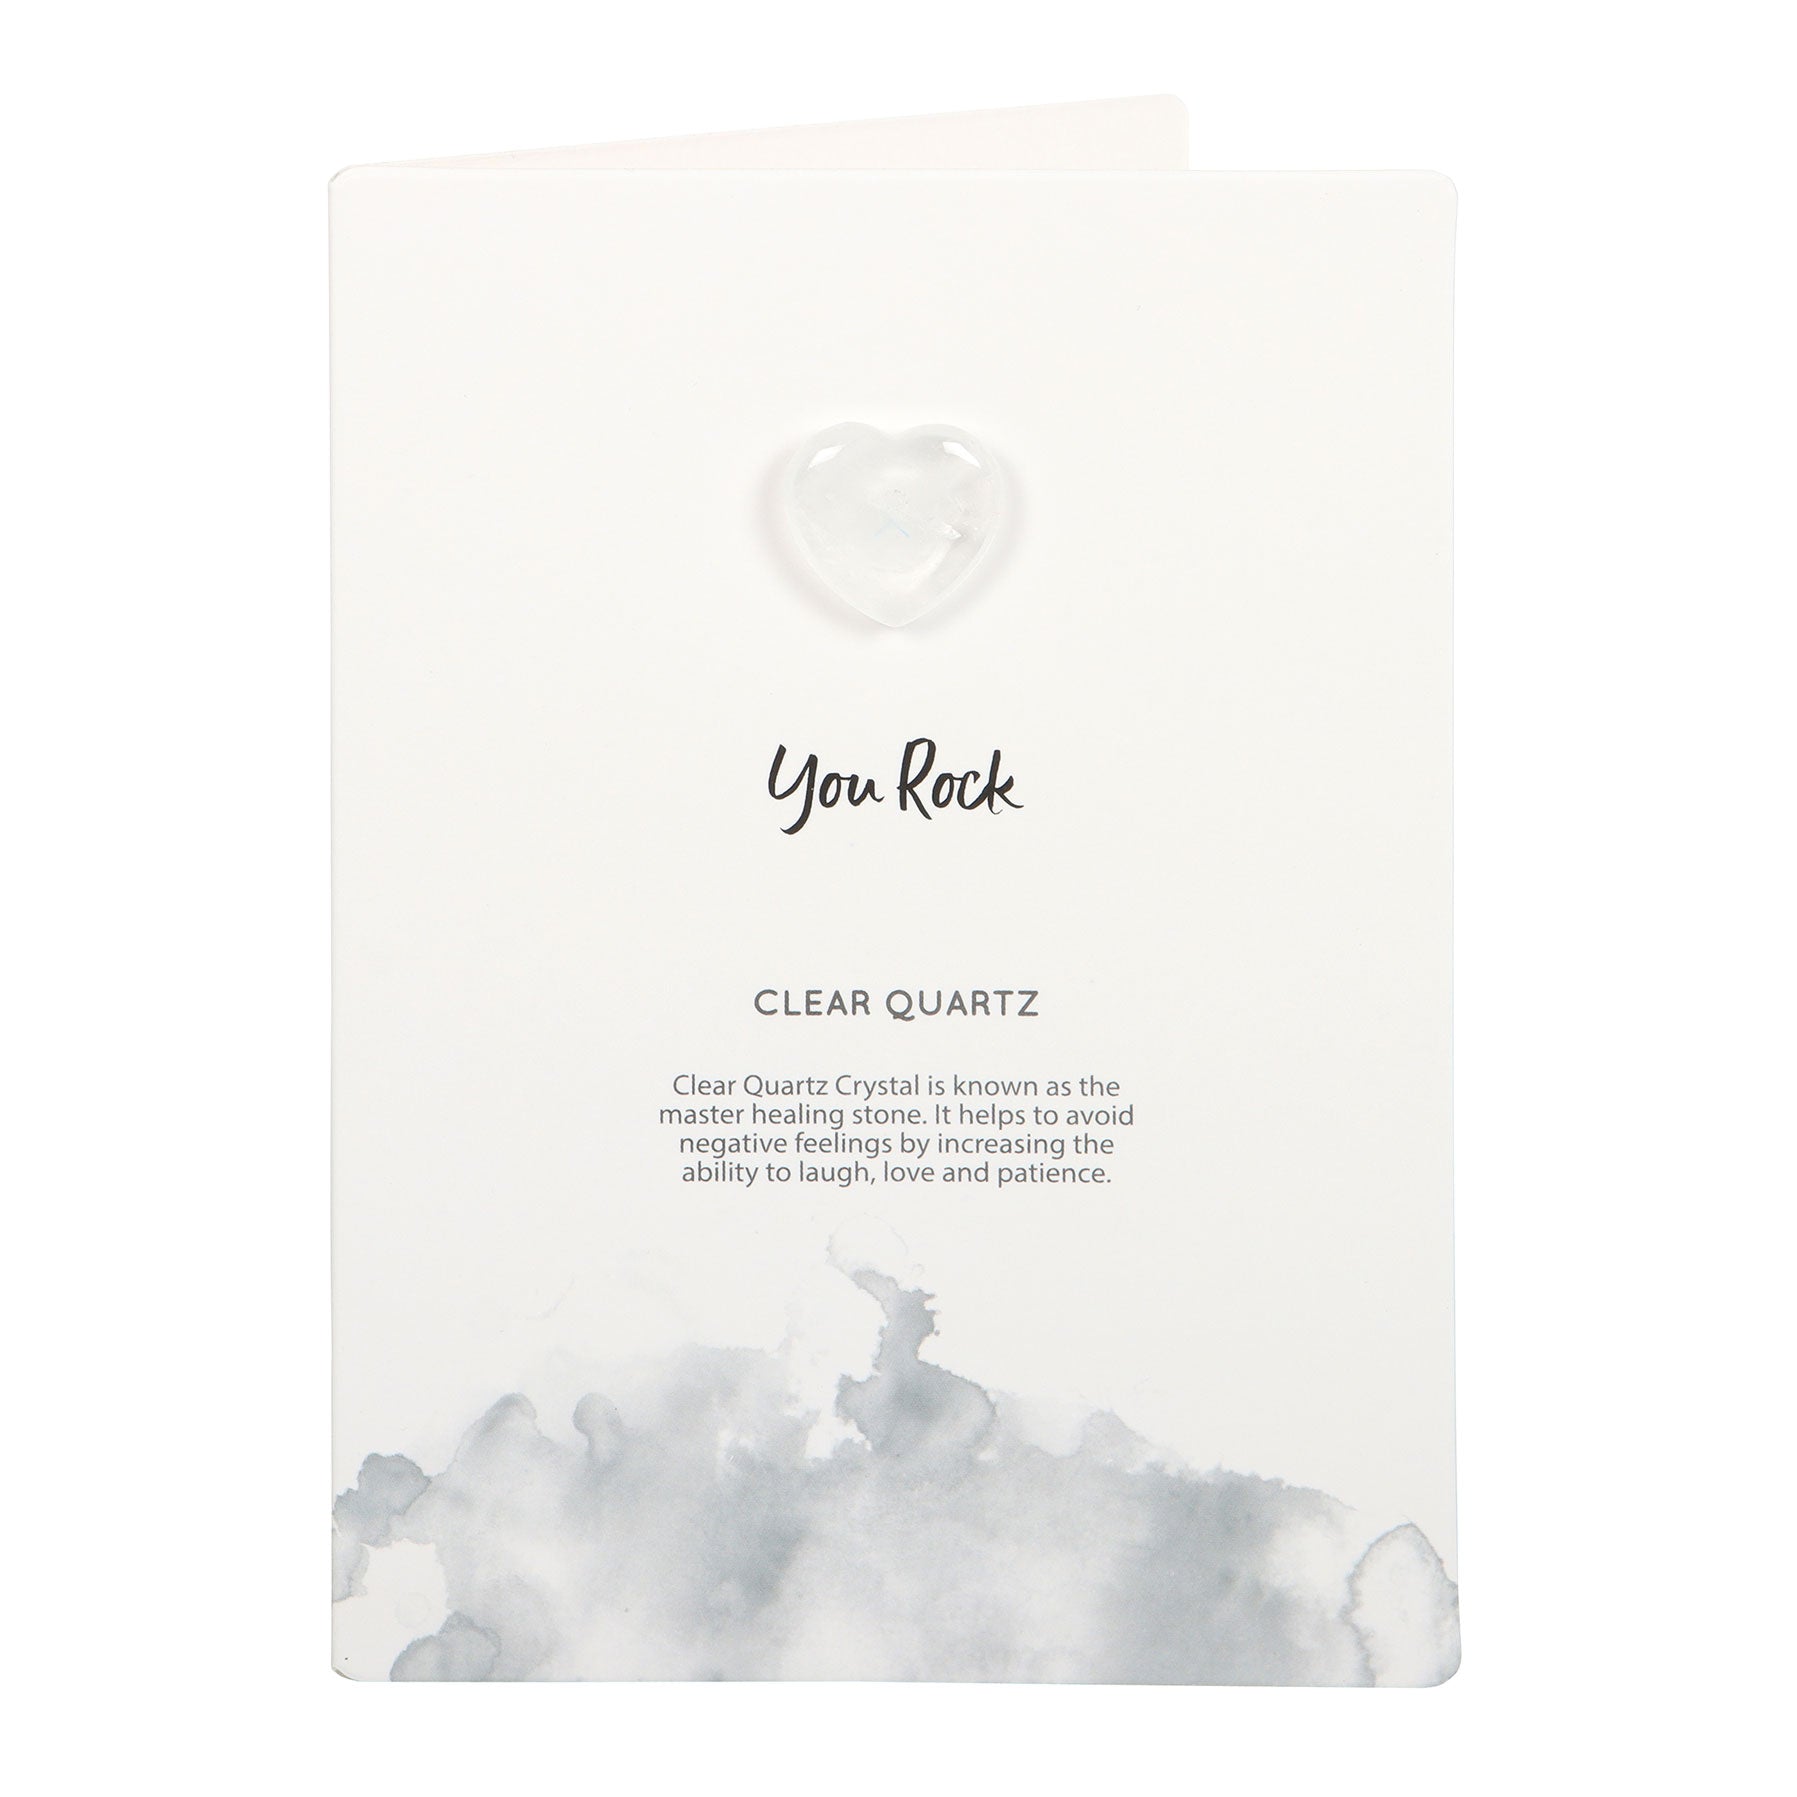 View You Rock Clear Quartz Crystal Heart Greeting Card information